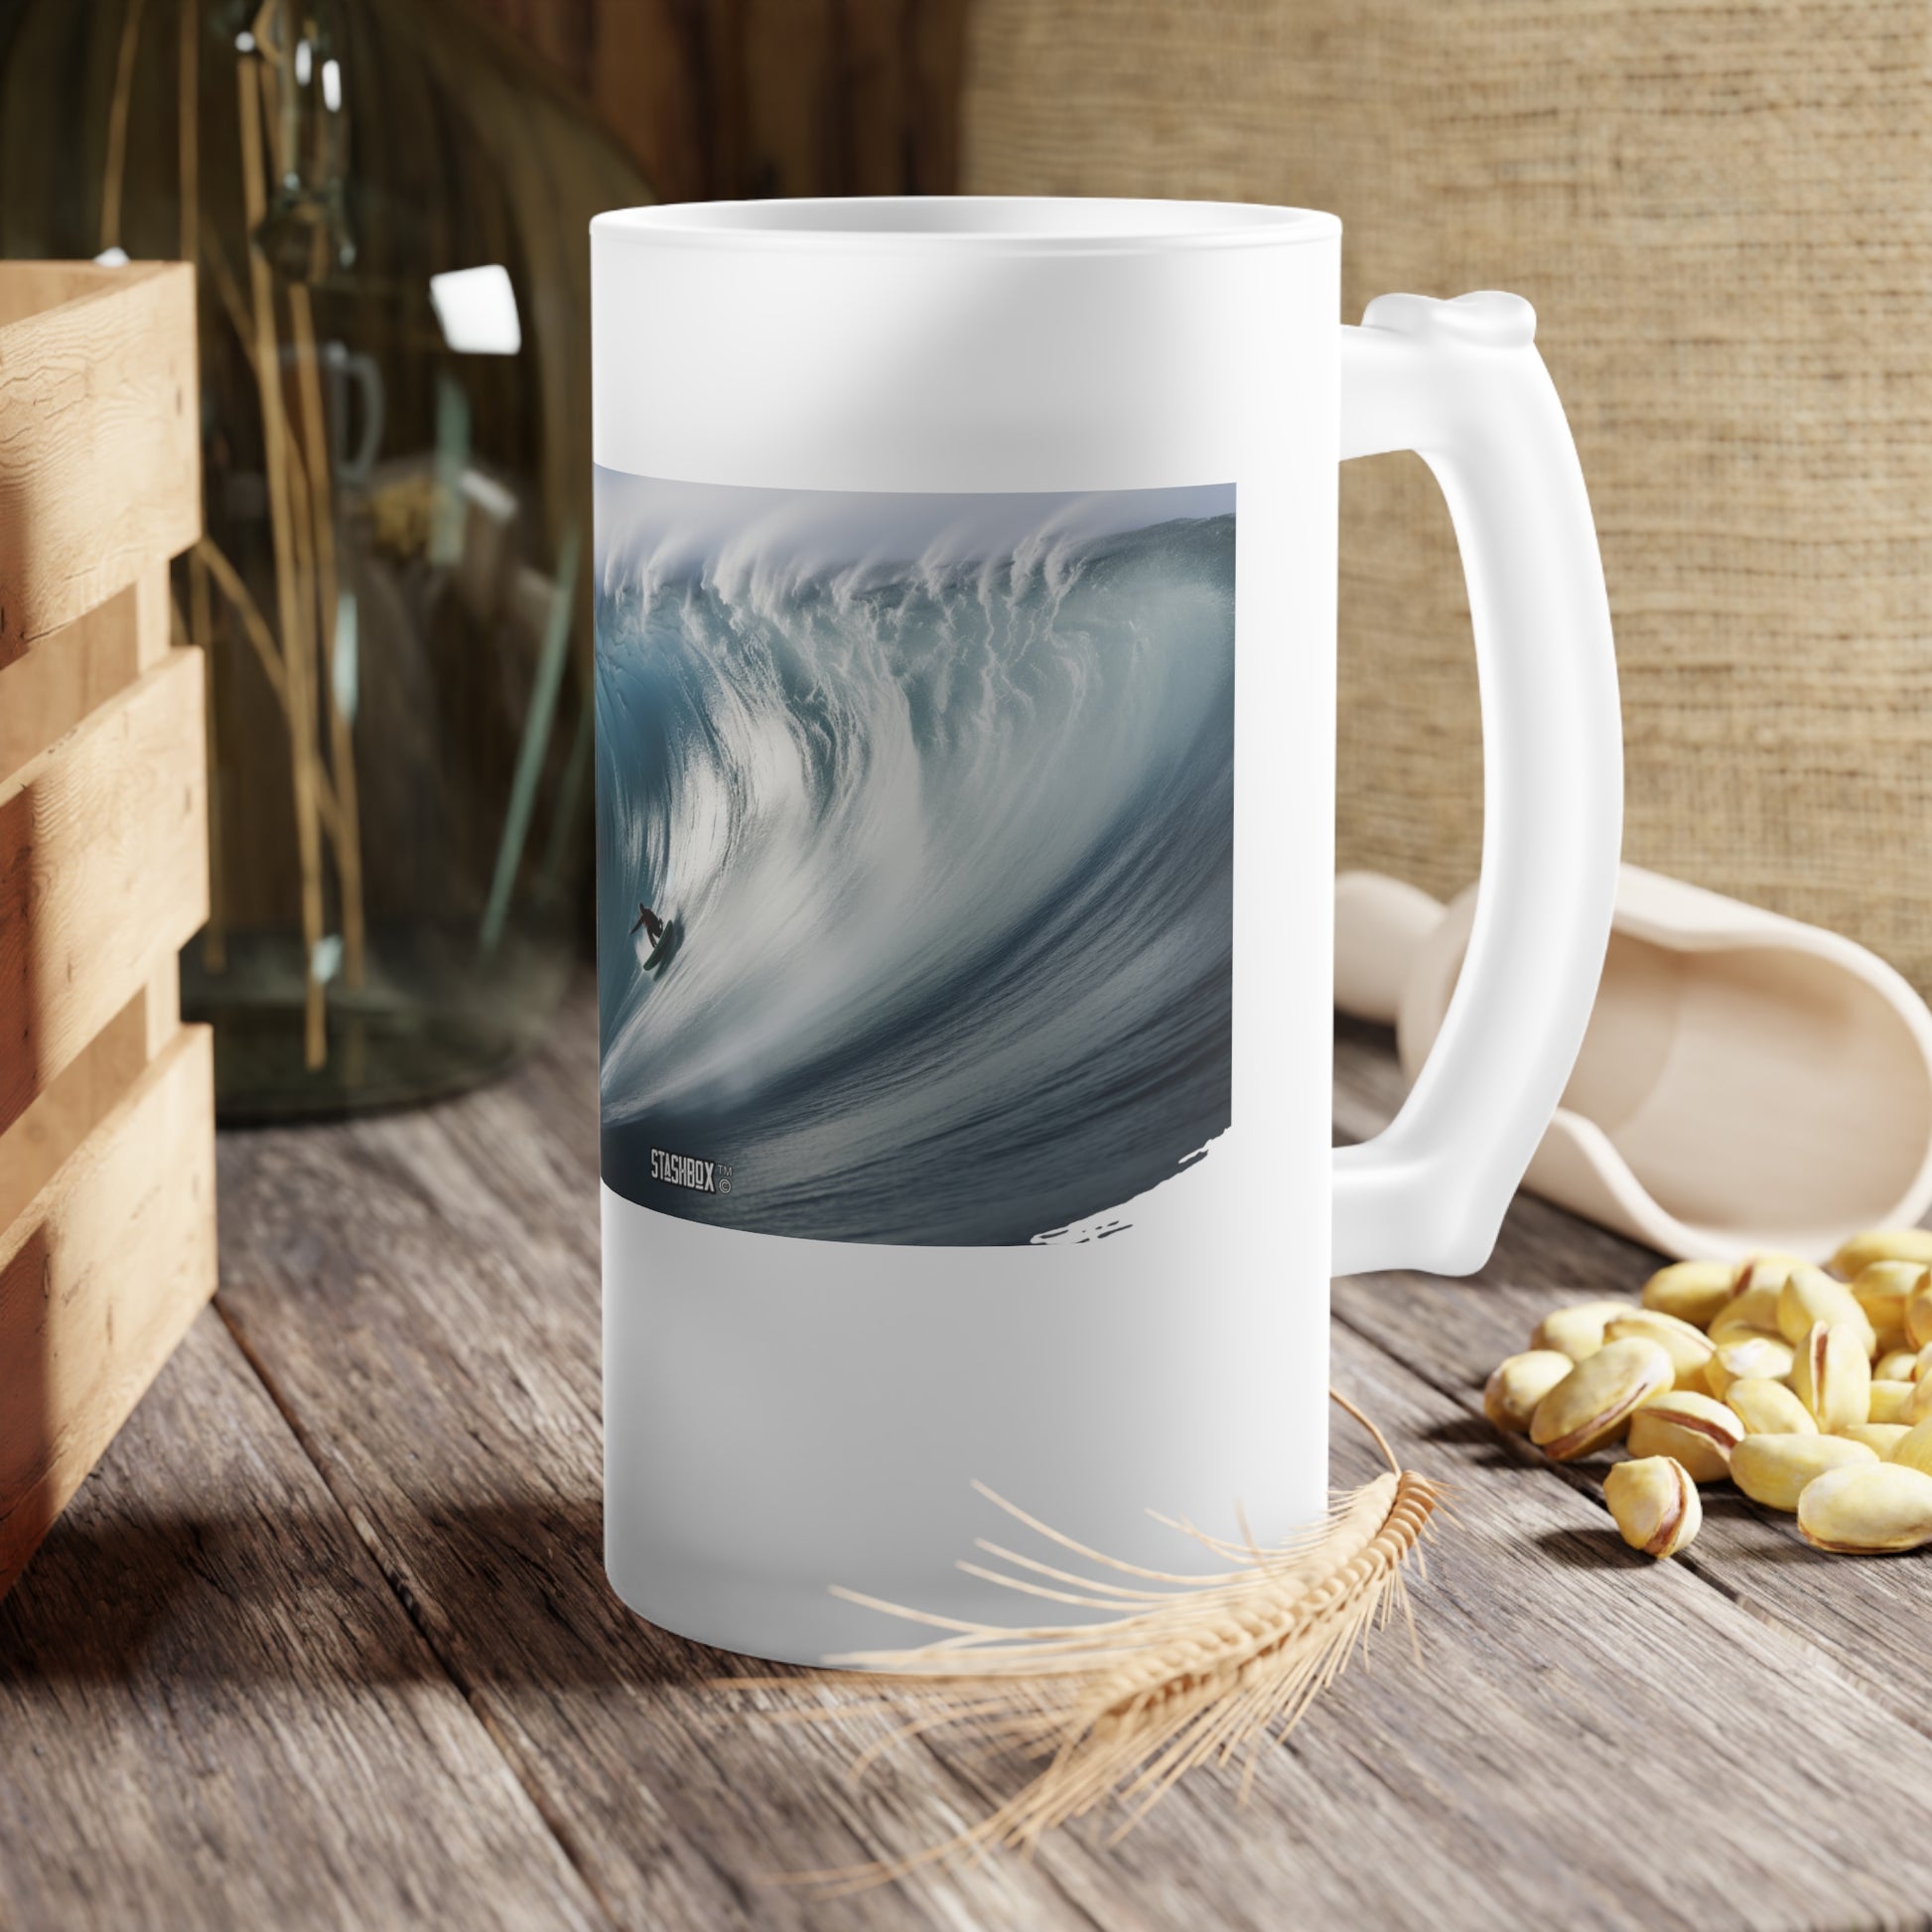 Surf's Up in Every Sip: Dive into the heart of the ocean with our Frosted Glass Beer Mug - Waves Design #061. Featuring a surfer conquering a monstrous 61-foot wave, this mug brings the adrenaline of the surf to your drinking experience. 🌊🍻 #SurfingSpirit #GiantWaveAdventure #StashboxMug